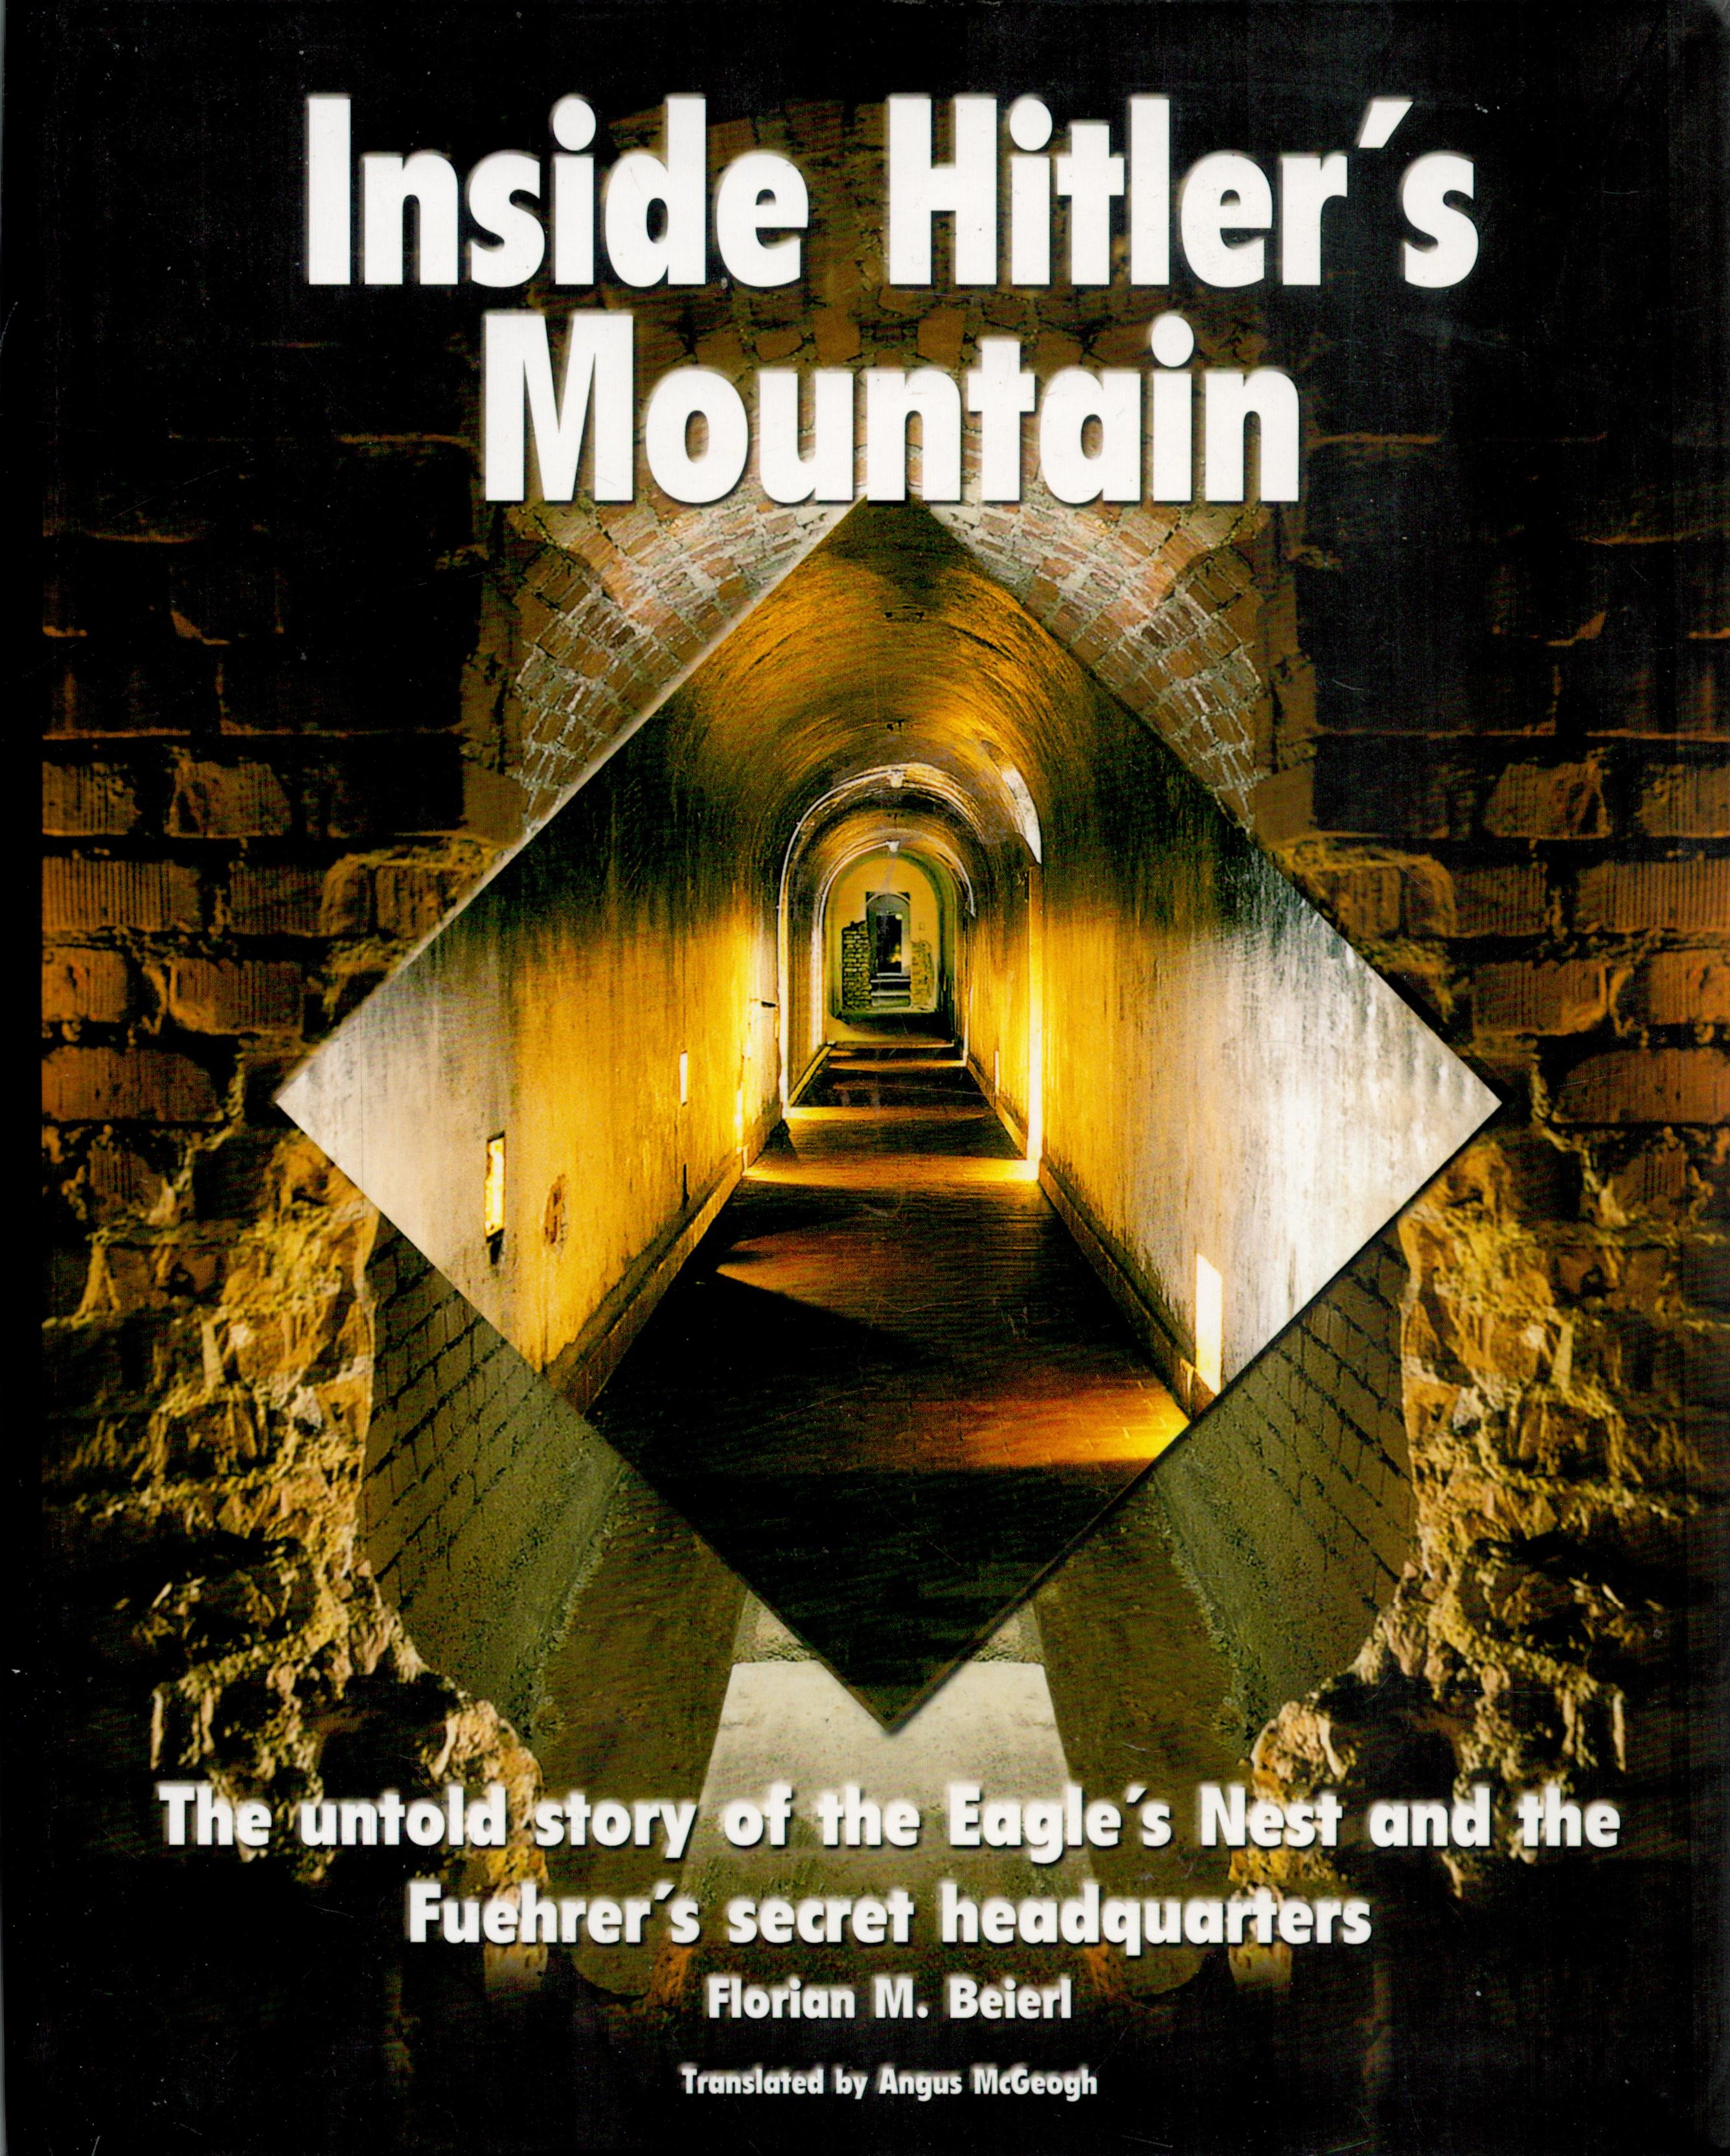 Inside Hitler's Mountain- The Untold Story of the Eagles Nest and the Fuehrers Secret Headquarters